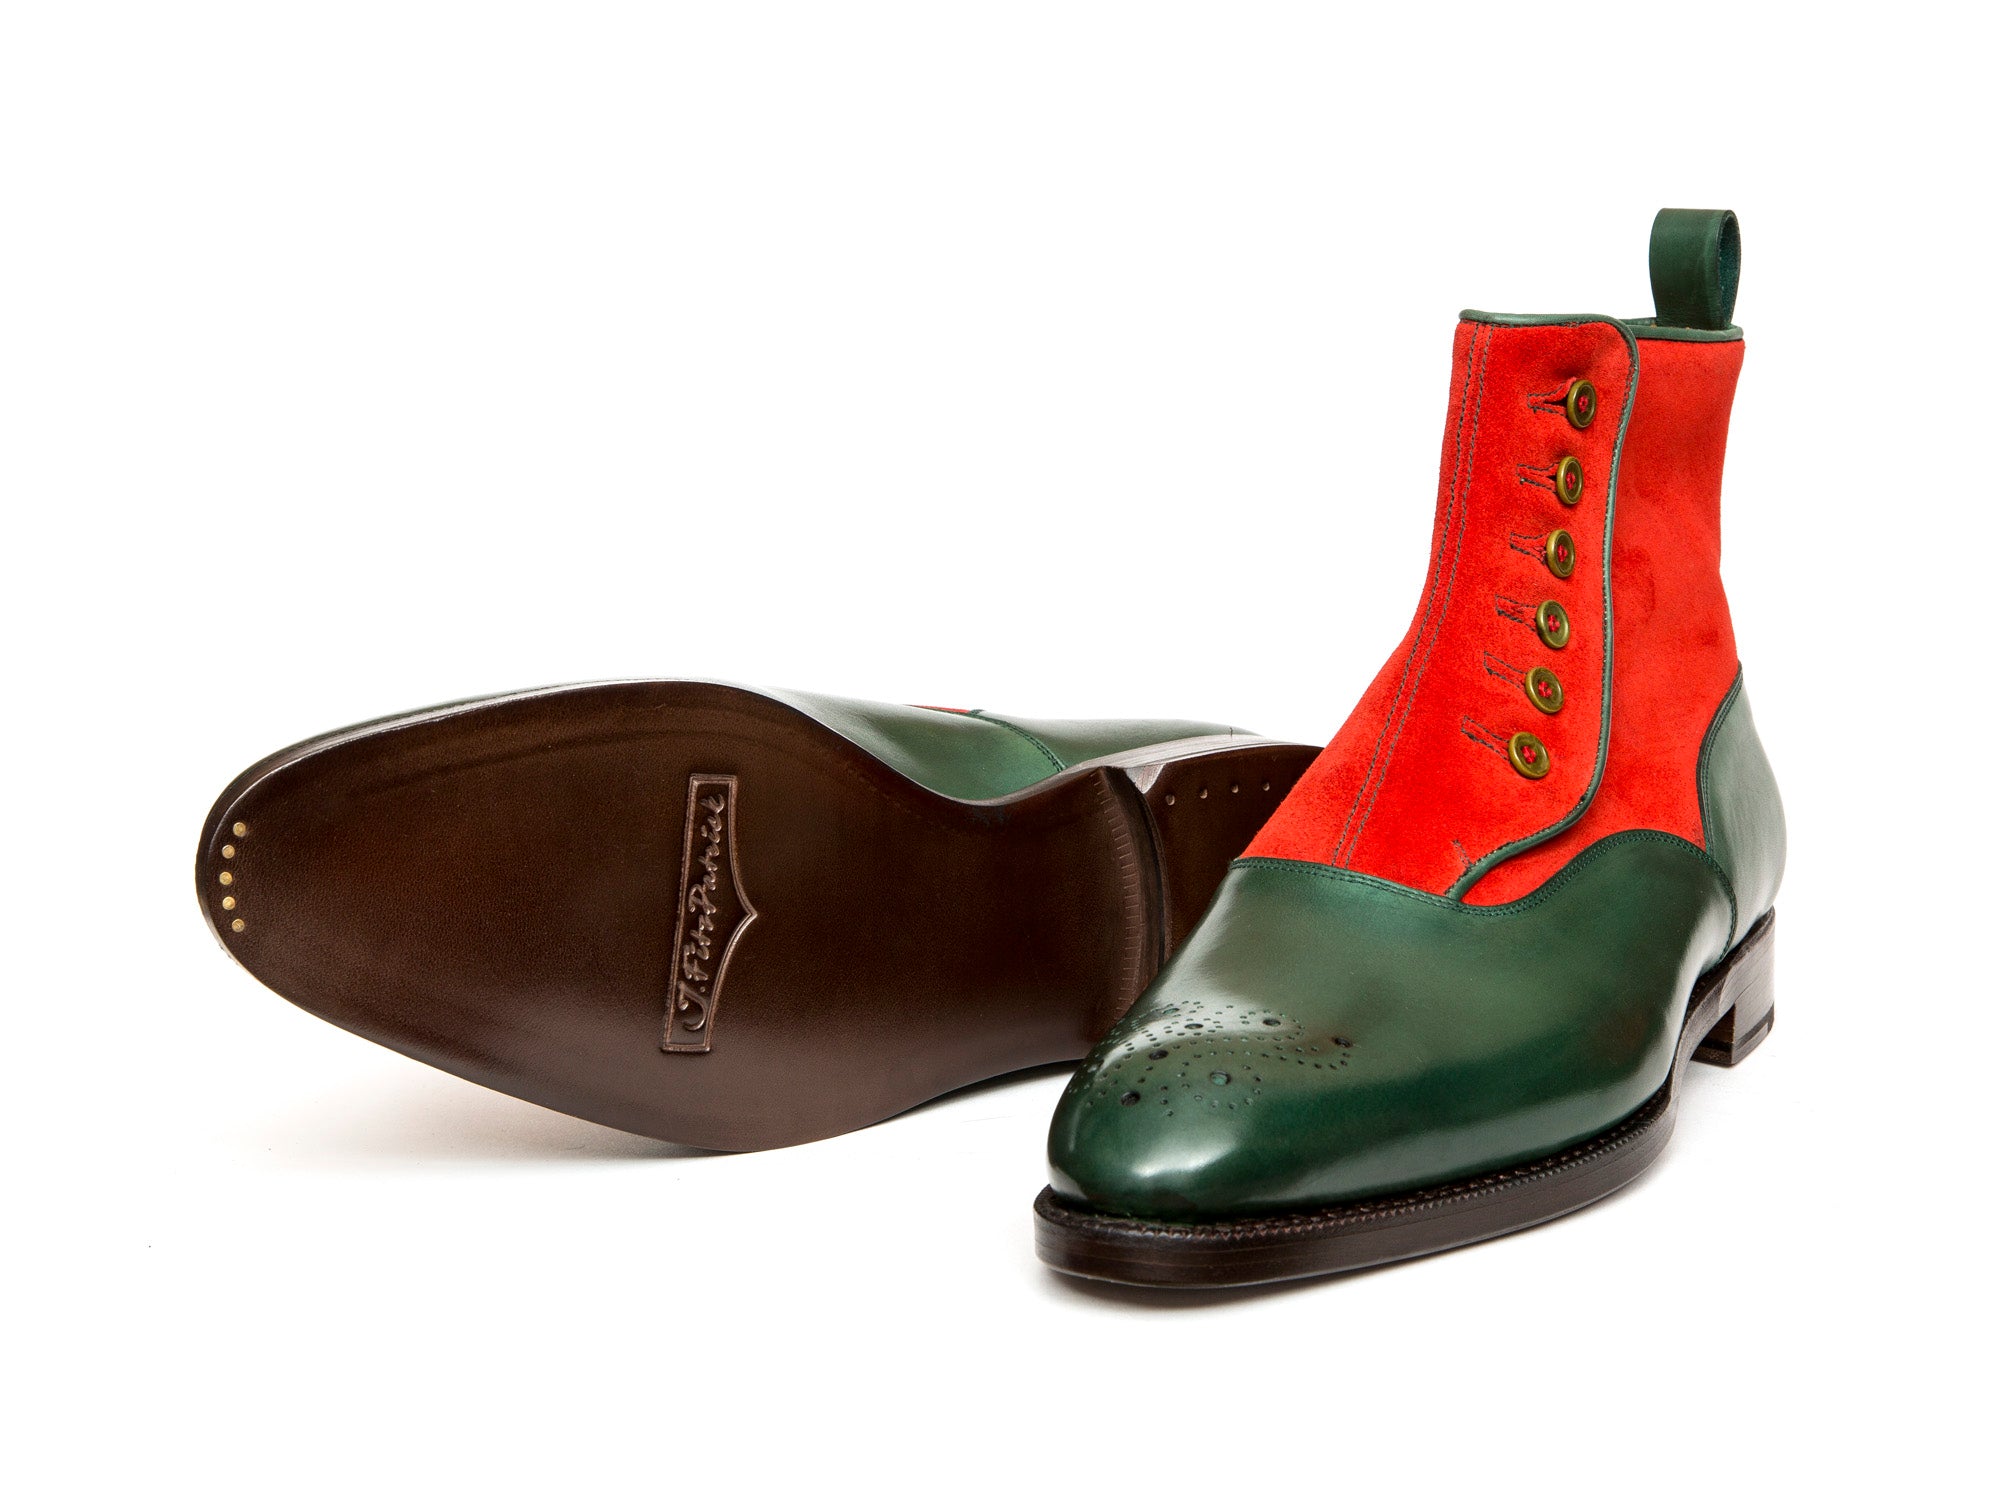 Westlake - MTO - Forest Calf / Red Suede - NGT Last - Single Leather Sole